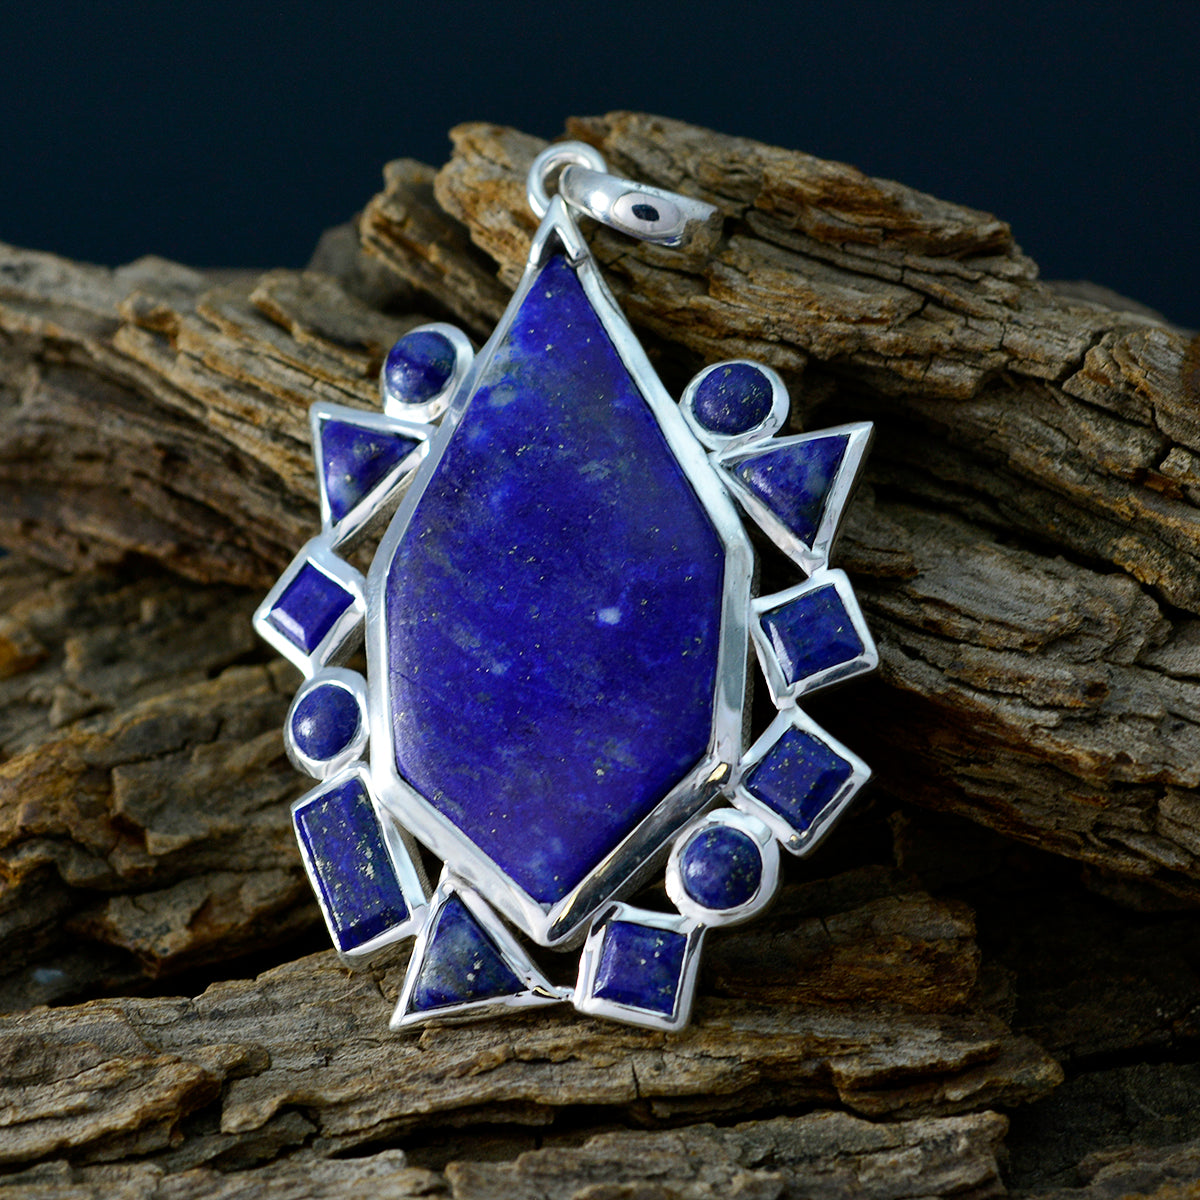 Riyo Natural Gemstone Multi Shape Faceted Nevy Blue Lapis Lazuli Solid Silver Pendants gift for mother's day